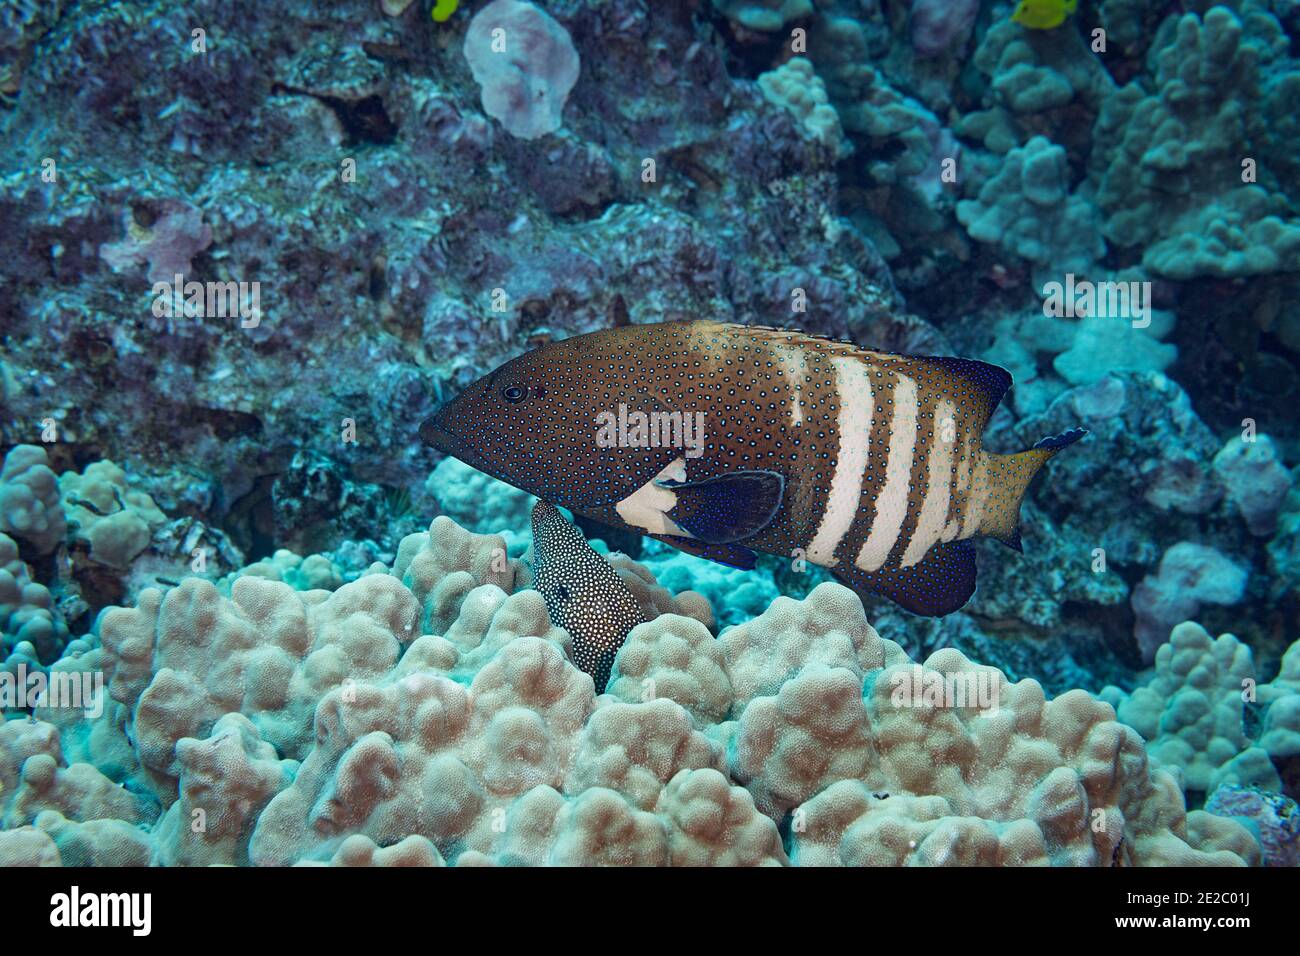 Hunting coalition consisting of a peacock grouper and a whitemouth moray eel. Grouper encourages eel to start hunting by gently rubbing against it. Stock Photo